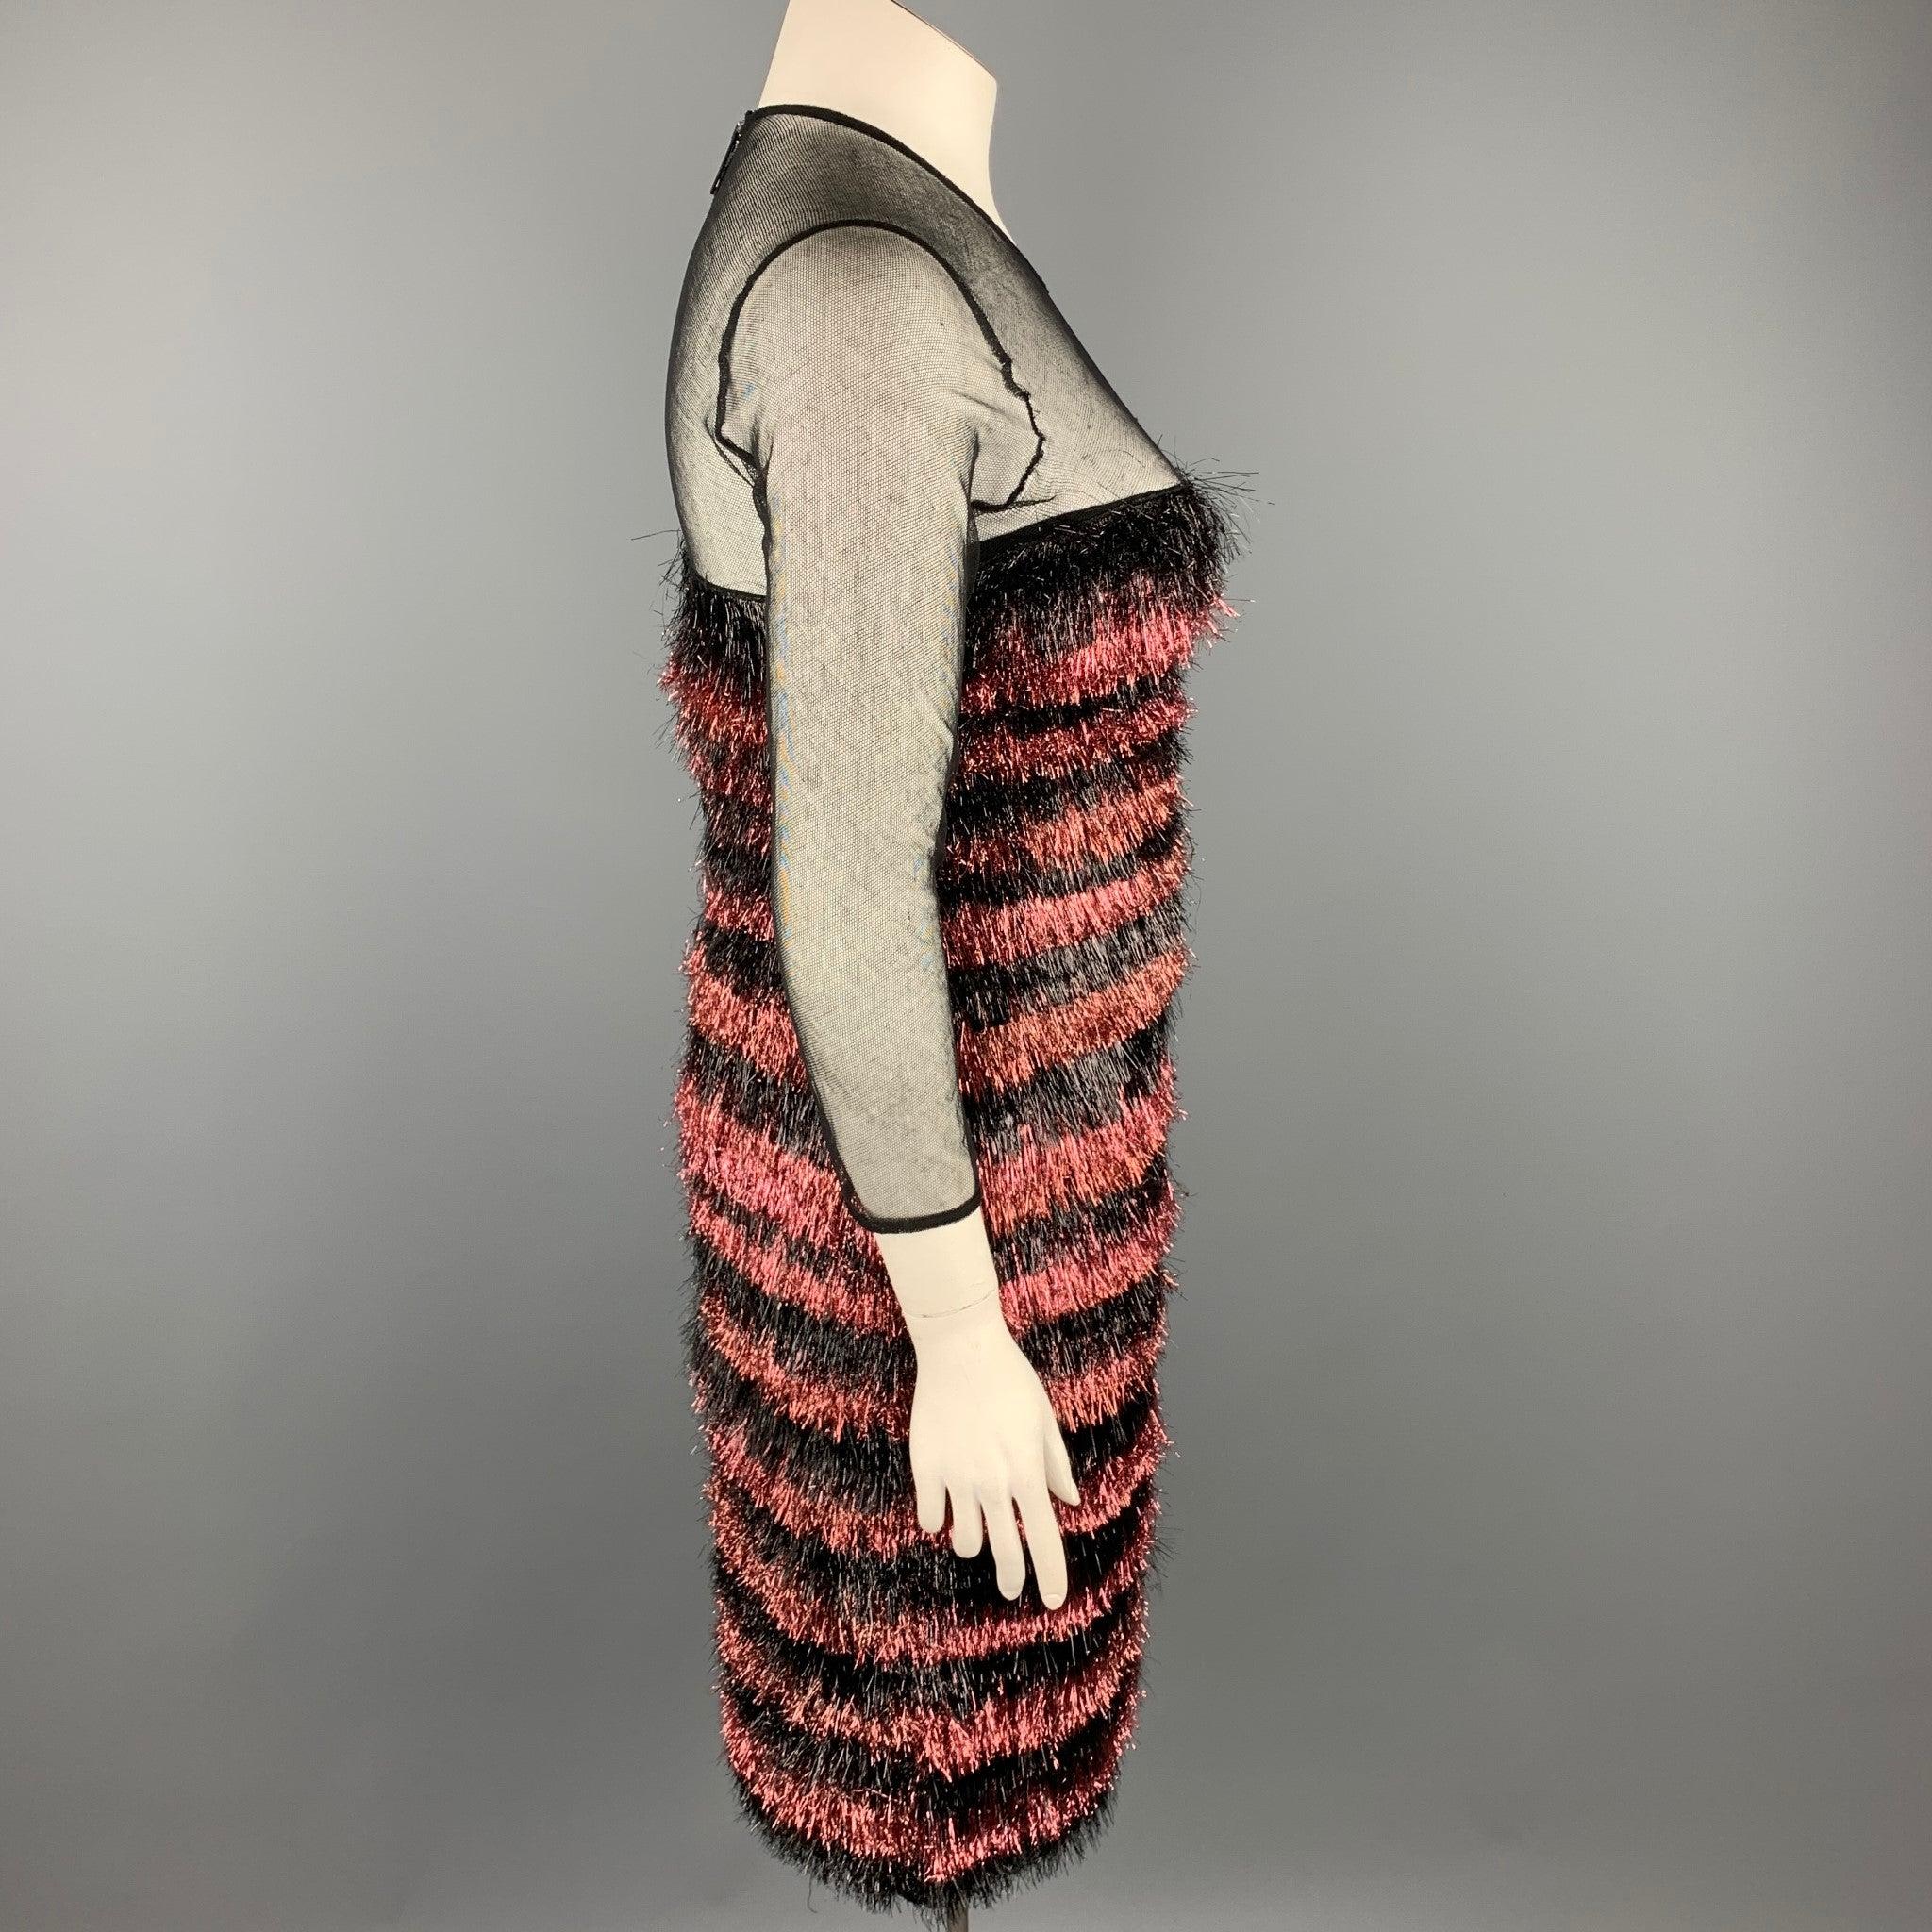 BURBERRY PRORSUM F/W 12 Size 10 Nylon/Polyester Tinsel Illusion Eyelash Dress In Good Condition For Sale In San Francisco, CA